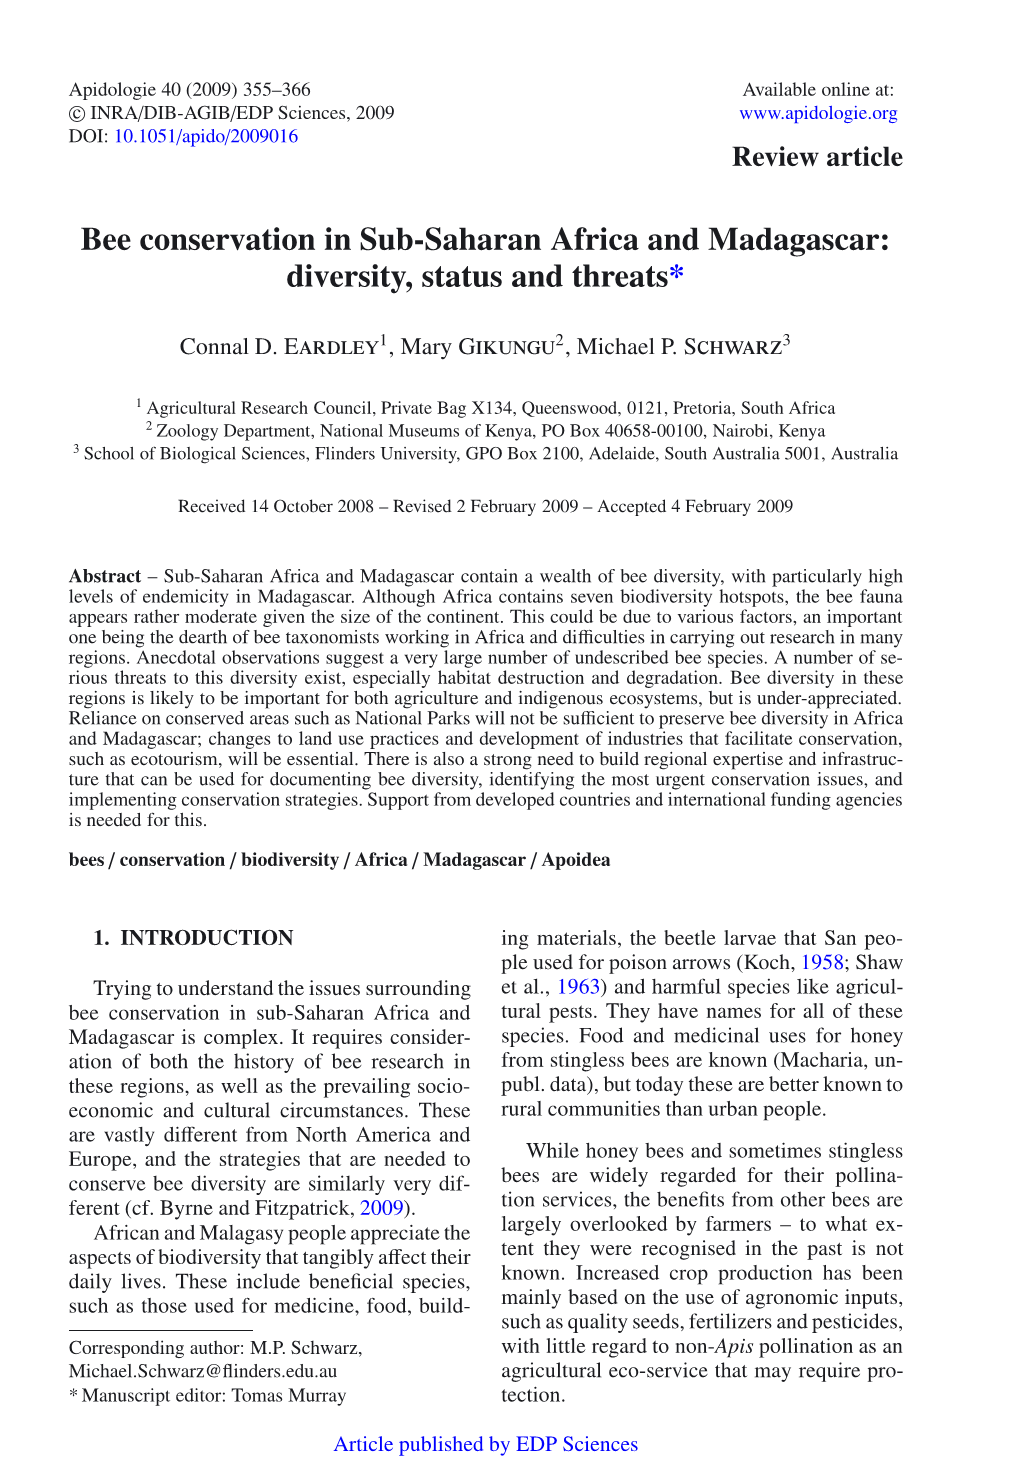 Bee Conservation in Sub-Saharan Africa and Madagascar: Diversity, Status and Threats*